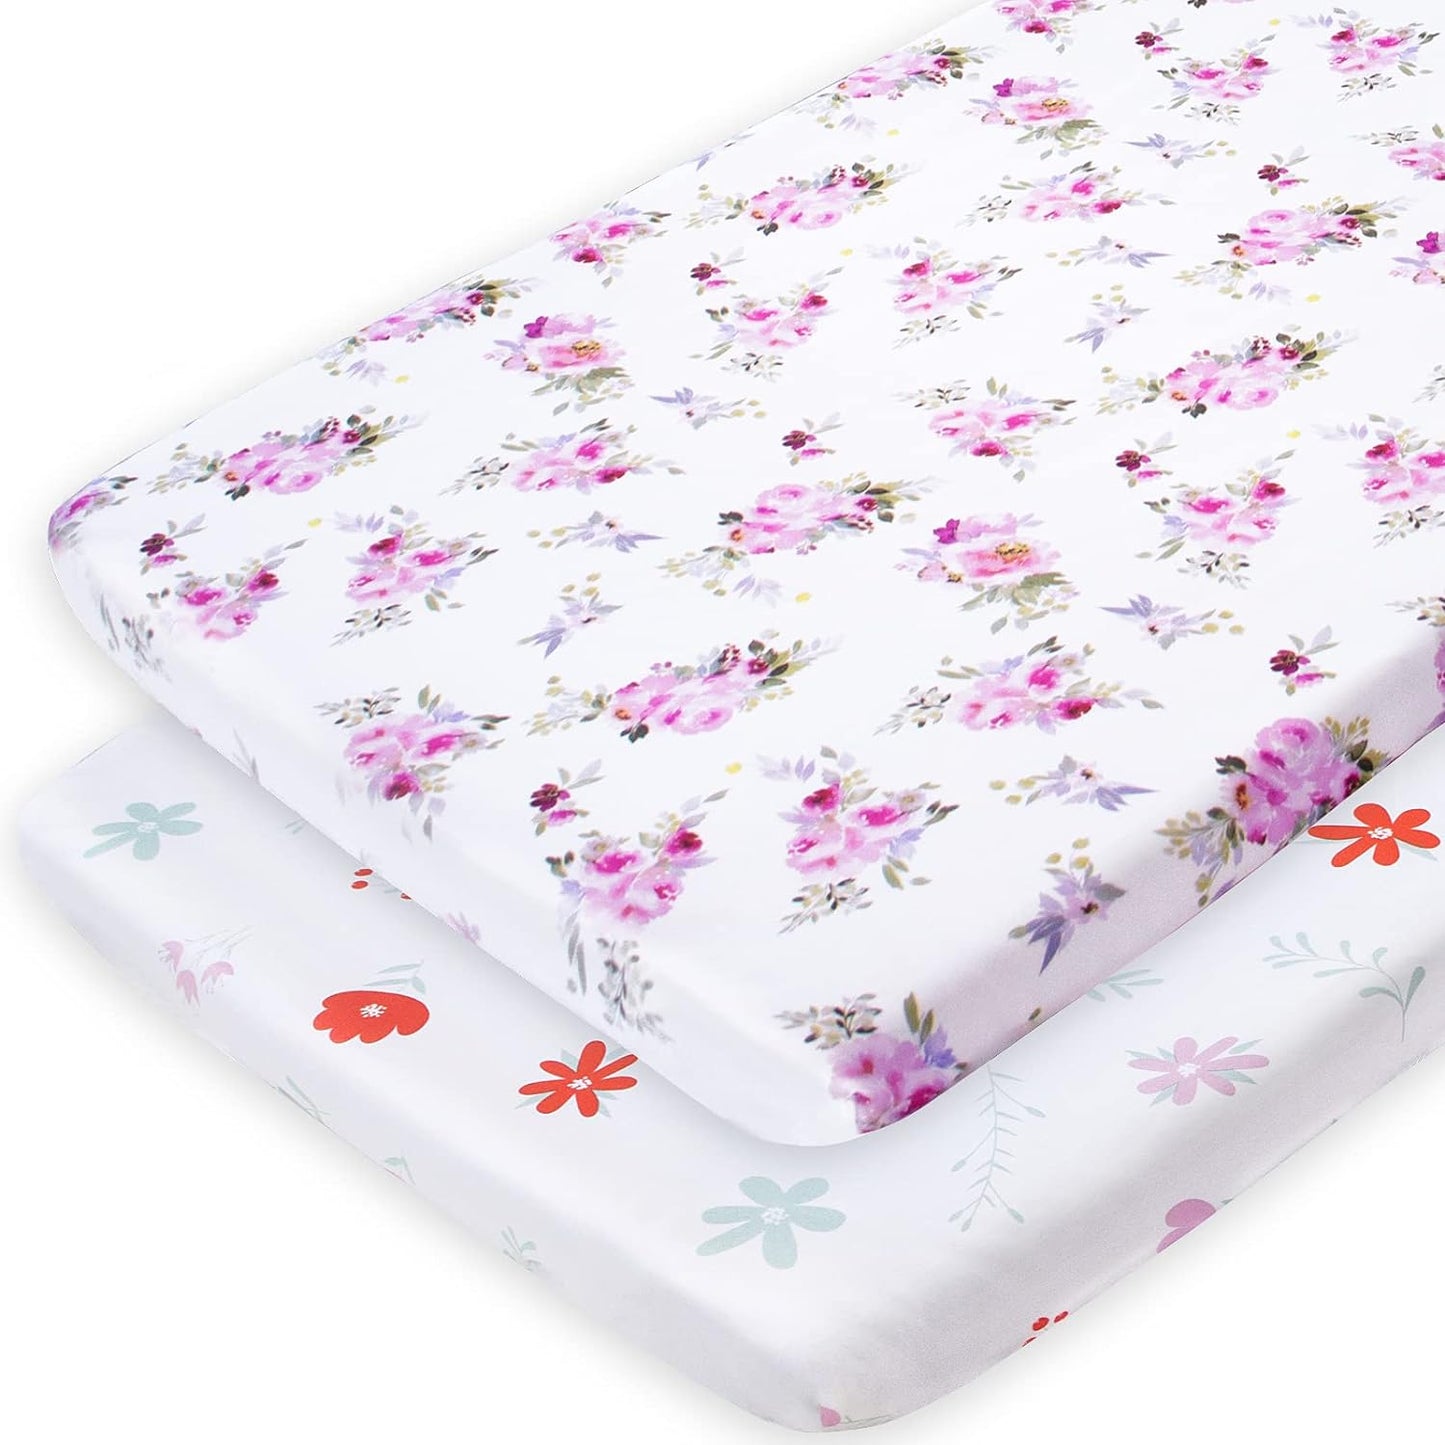 Pack n Play Sheet | Mini Crib Sheet - 2 Pack, Ultra-Soft Microfiber, Fits Graco Pack and Play, Floral-Moonsea Bedding